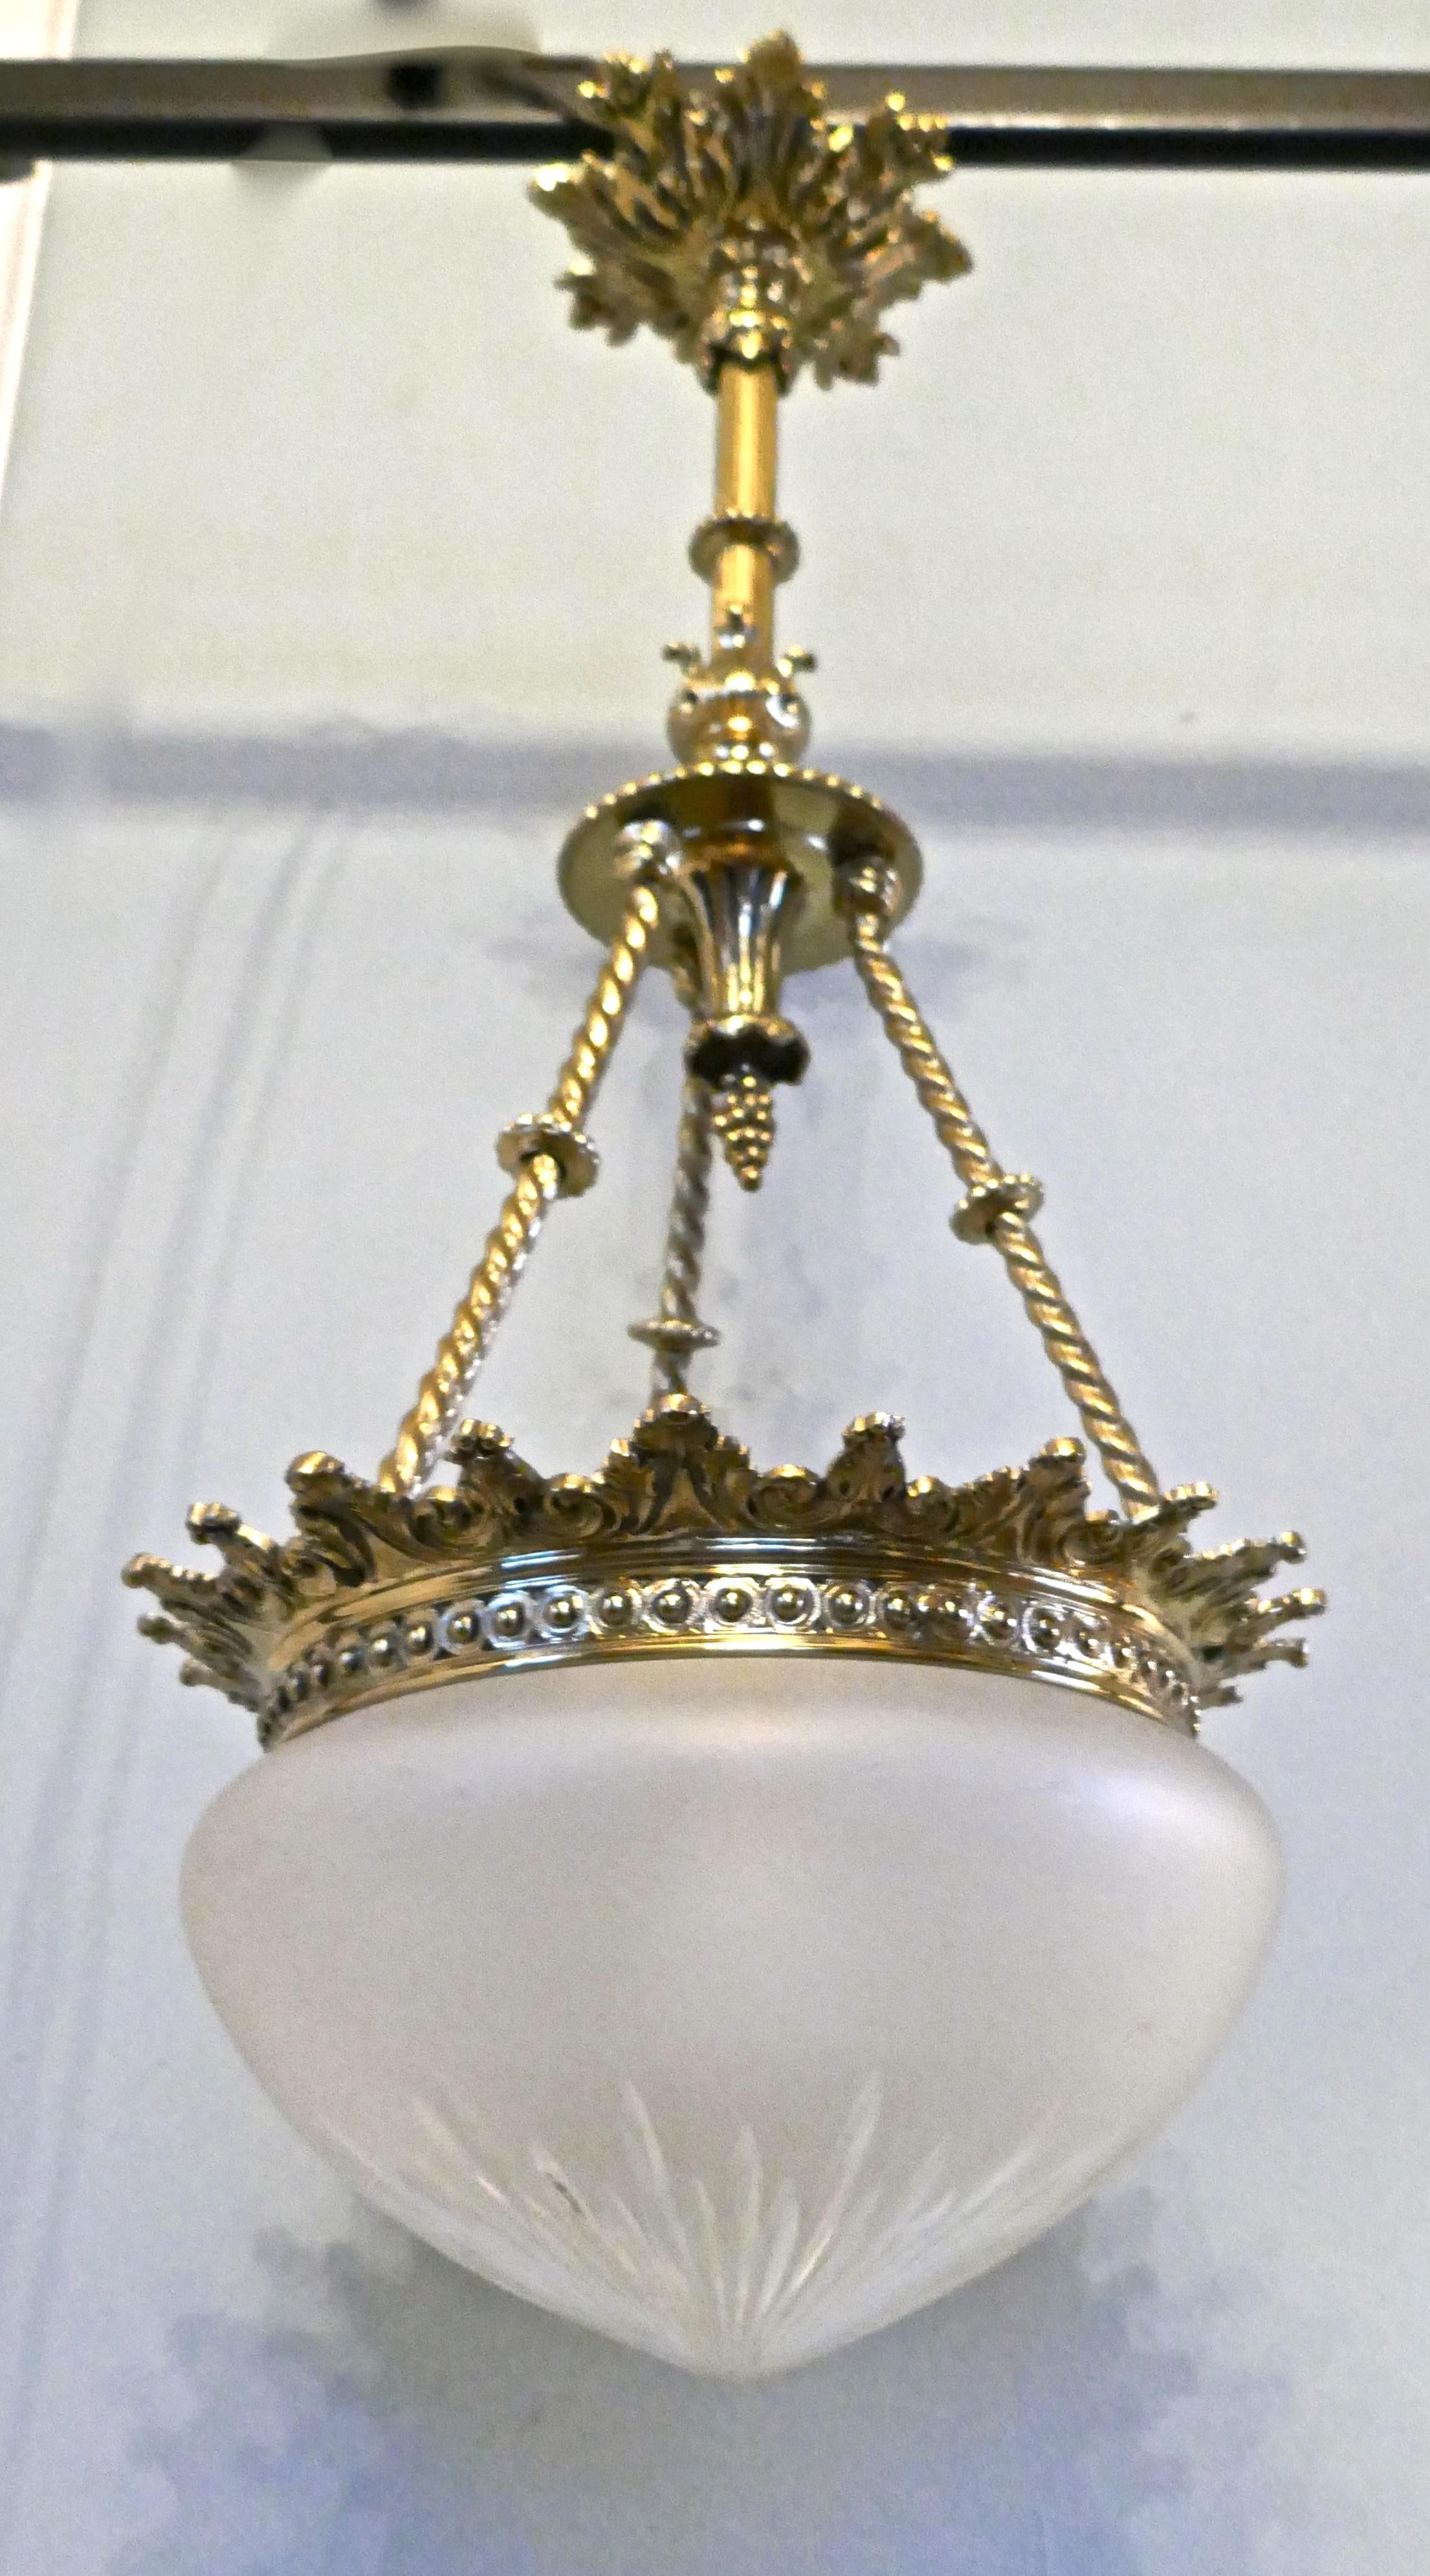 Beautiful large early 20th century Empire style bowl chandelier

This is a stunning piece, it has an bright brass frame, at the top there is an elaborated ceiling rose decorated with leaves, down through the centre there is a corinthian style